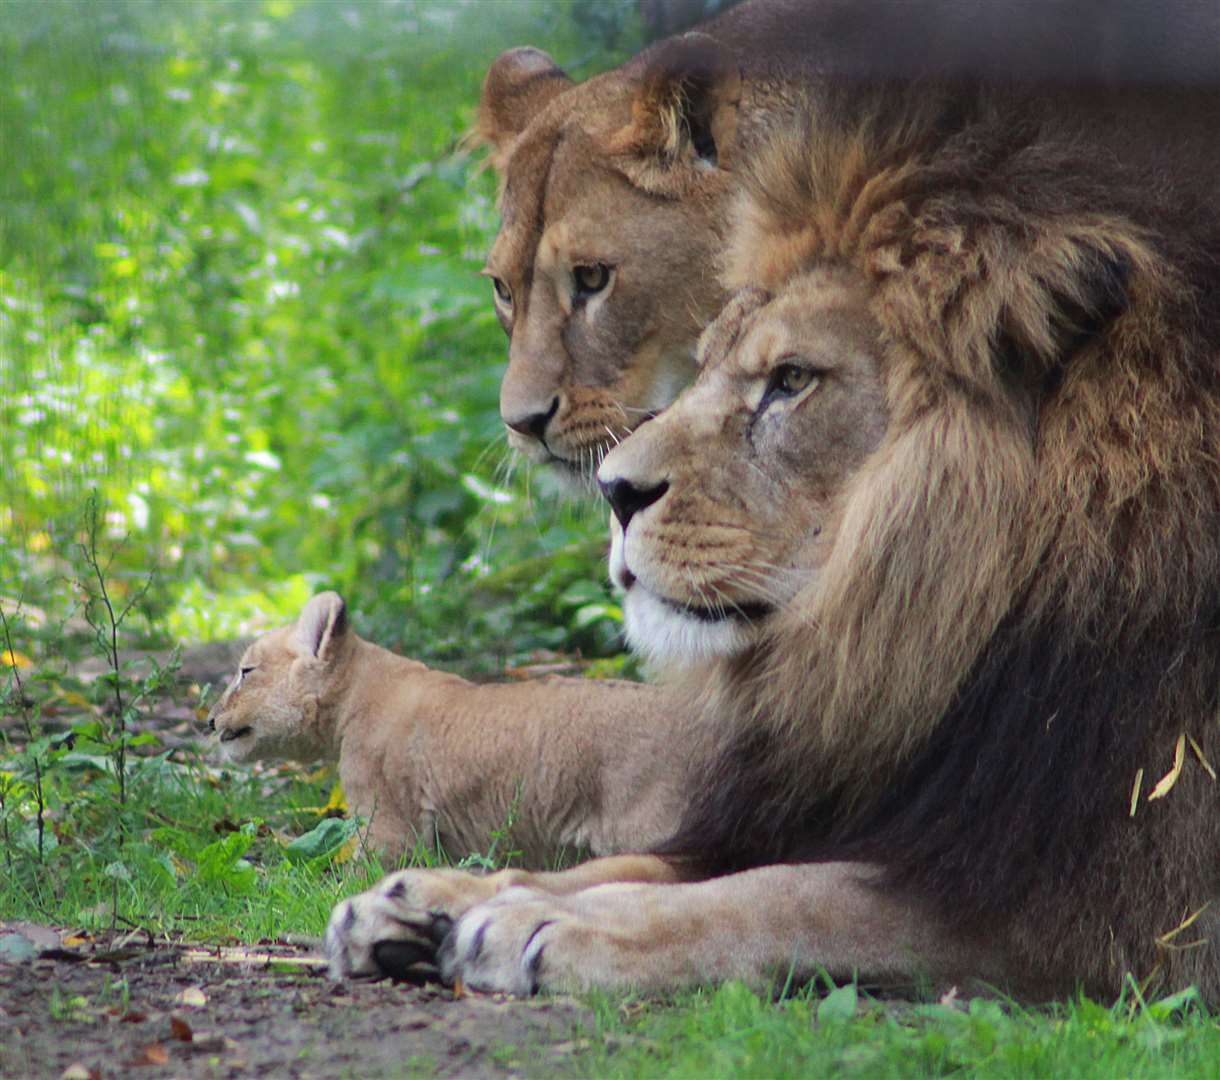 Lions at Port Lympne could soon be seeing visitors